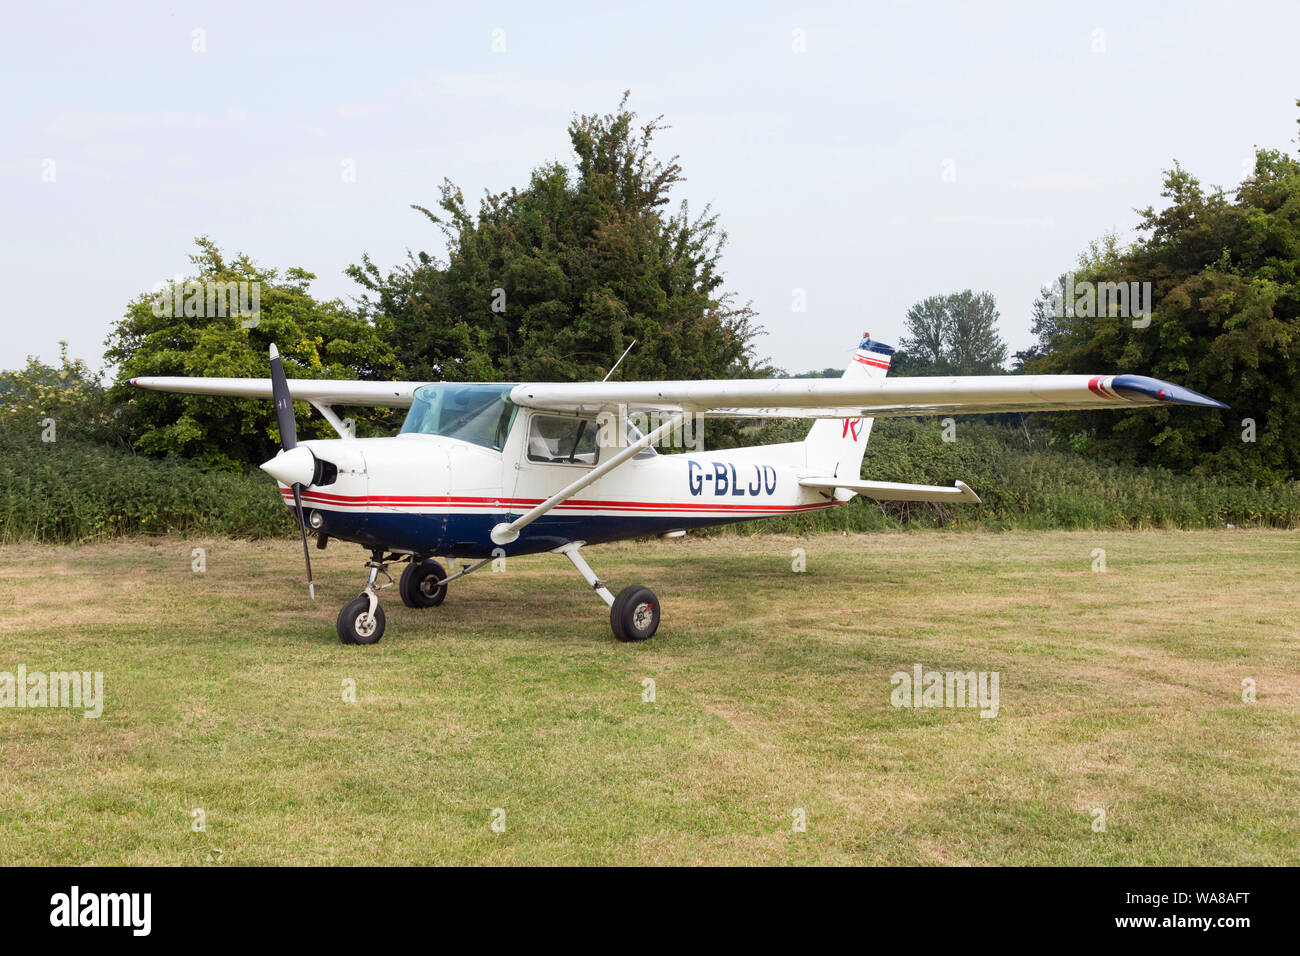 Cessna 152 aircraft parked on grass Stock Photo